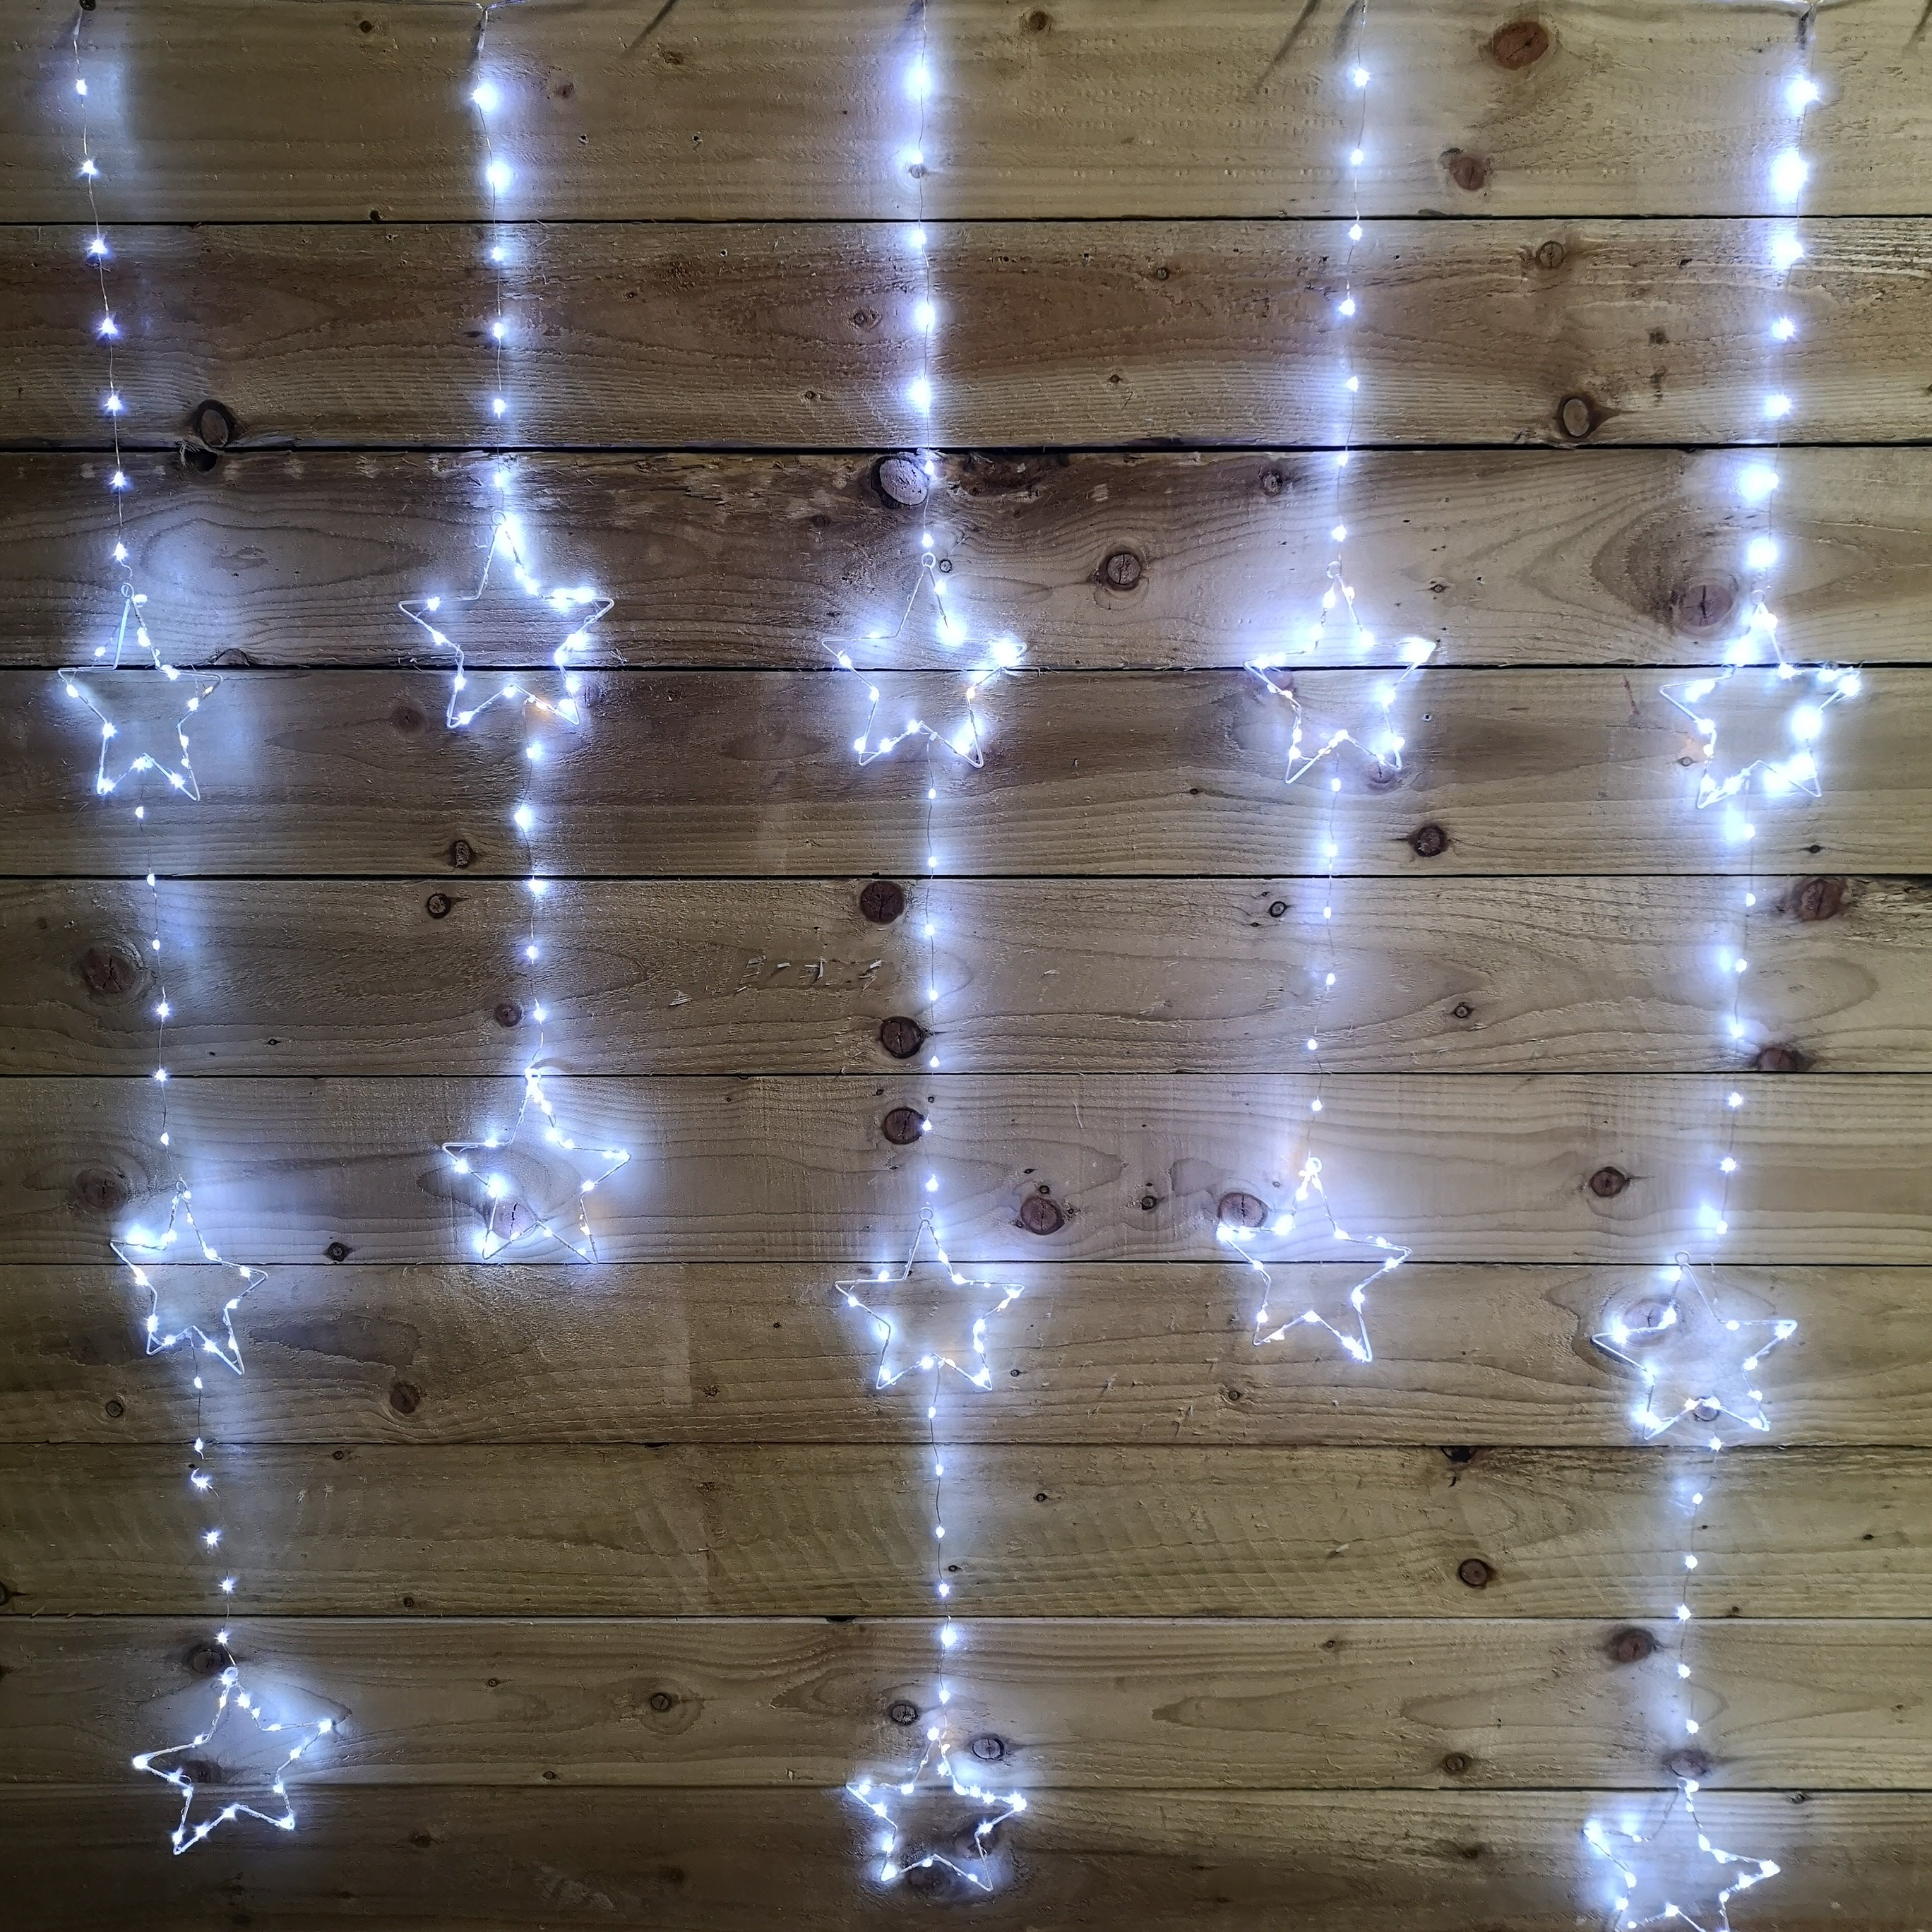 312 LED 1.3m x 1.2m Premier Static Star LED Curtain Christmas Lights Decoration in White 